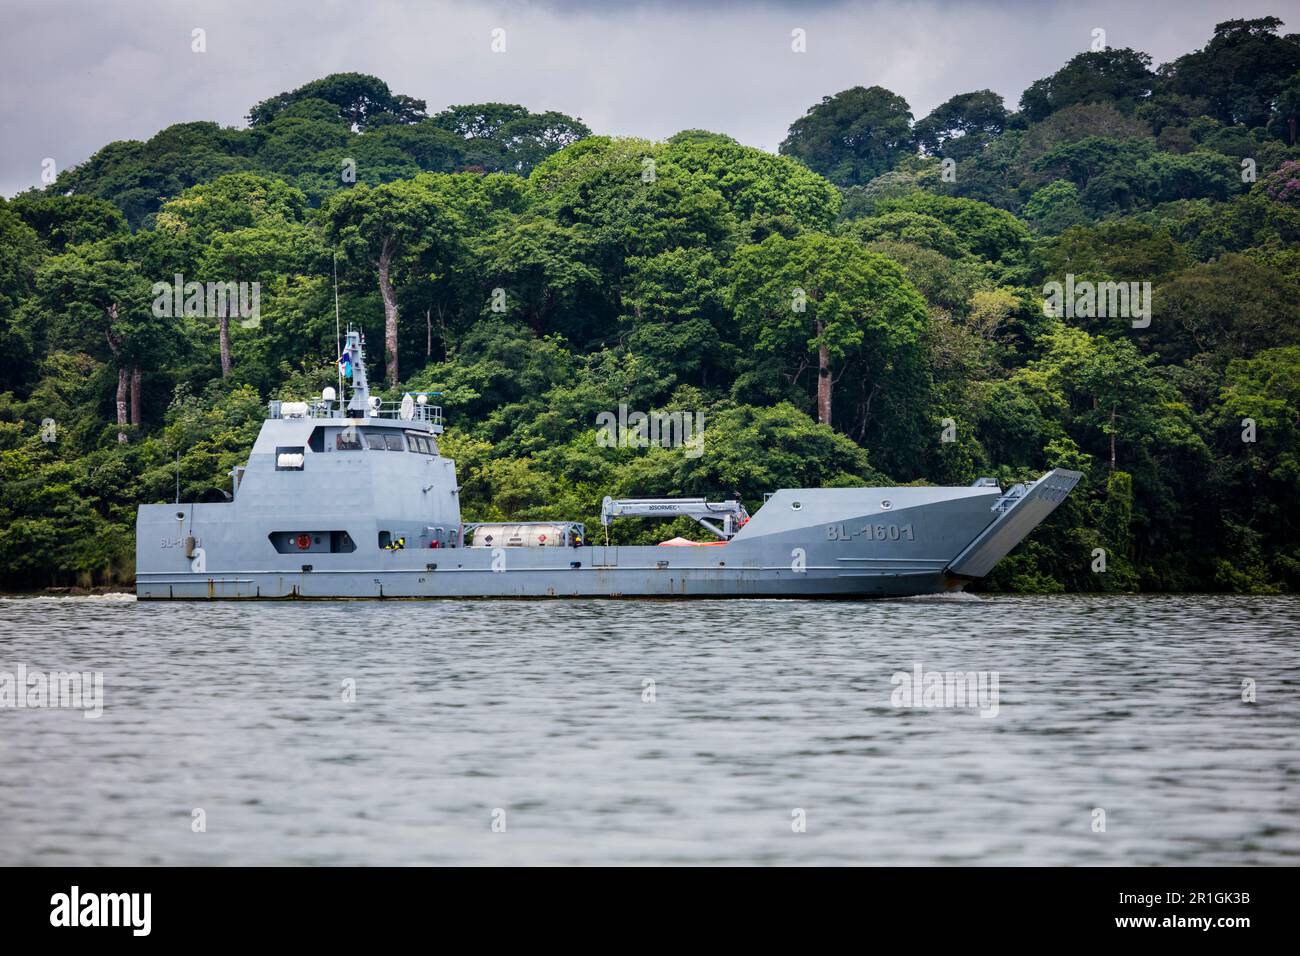 The Guatemalan navy multipurpose landing craft Quetzal (BL 1601) steams throught the Panama Canal, July 12, 2022, Republic of Panama, Central America. Stock Photo